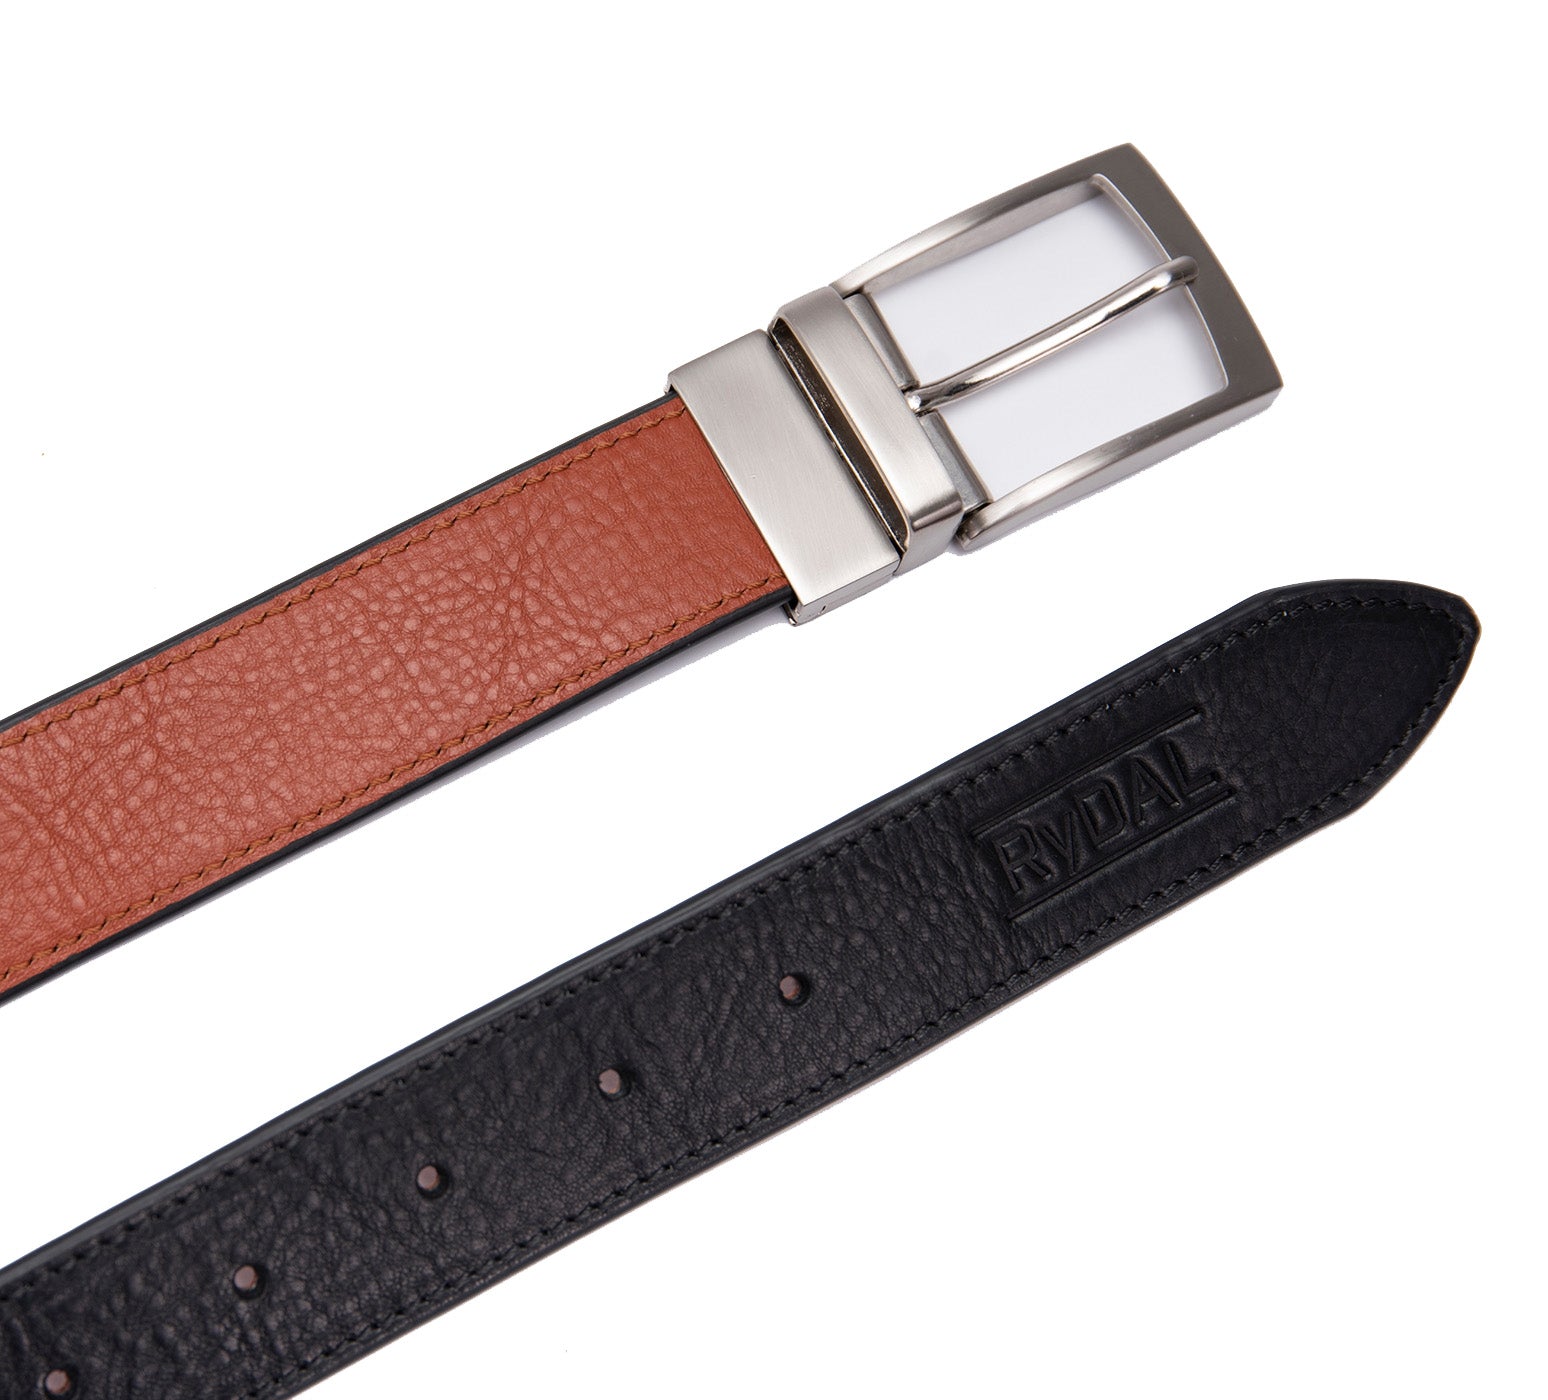 Firenze Mens Reversible Leather Belt from Rydal in 'Black/Rust' showing both sides.